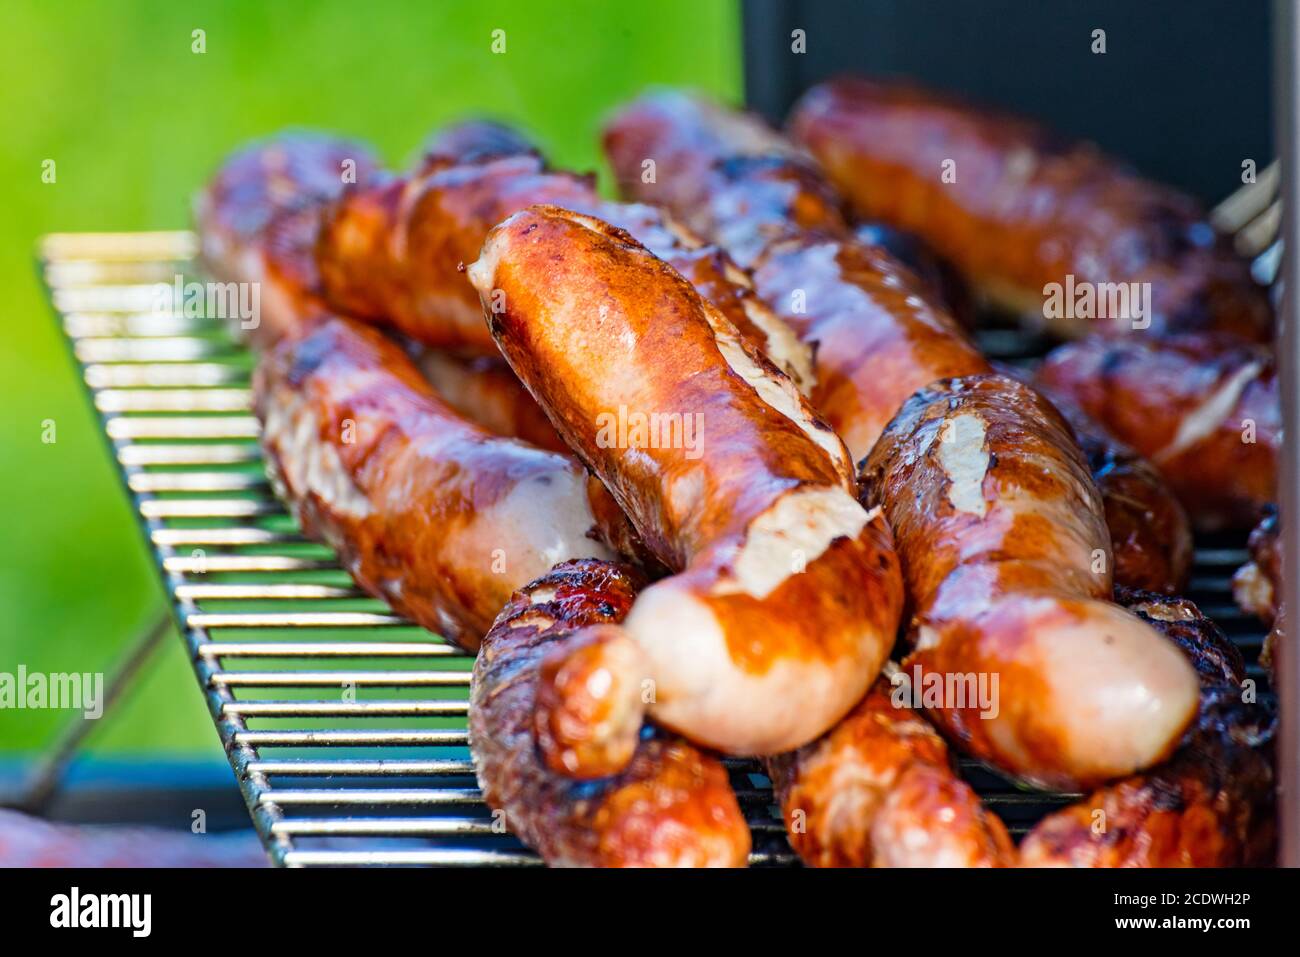 Brat sausages are grilled on the charcoal grill Stock Photo